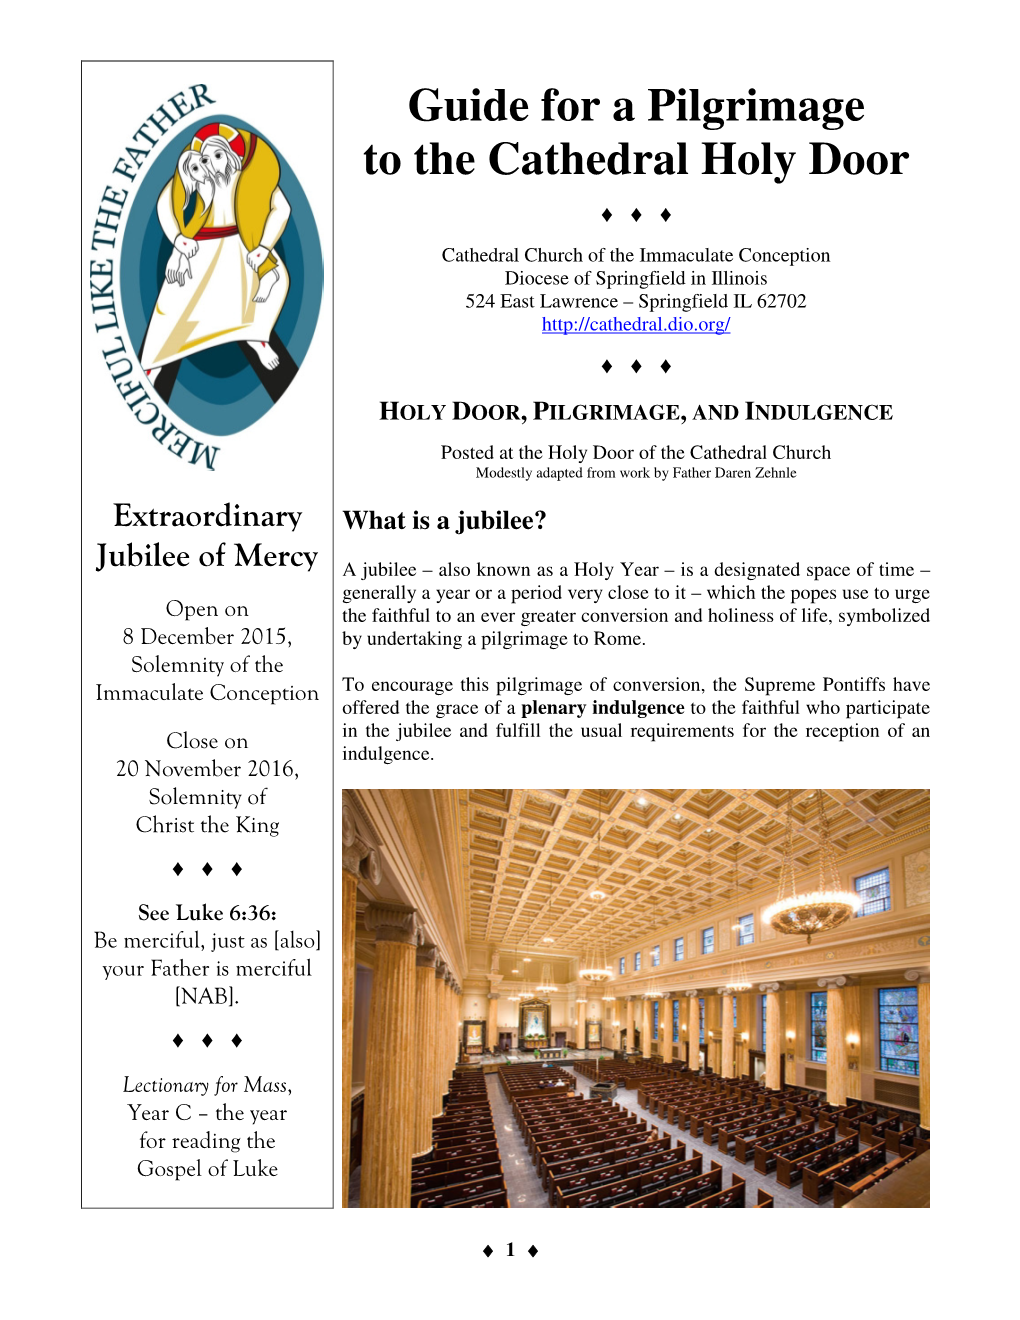 Guide for a Pilgrimage to the Cathedral Holy Door